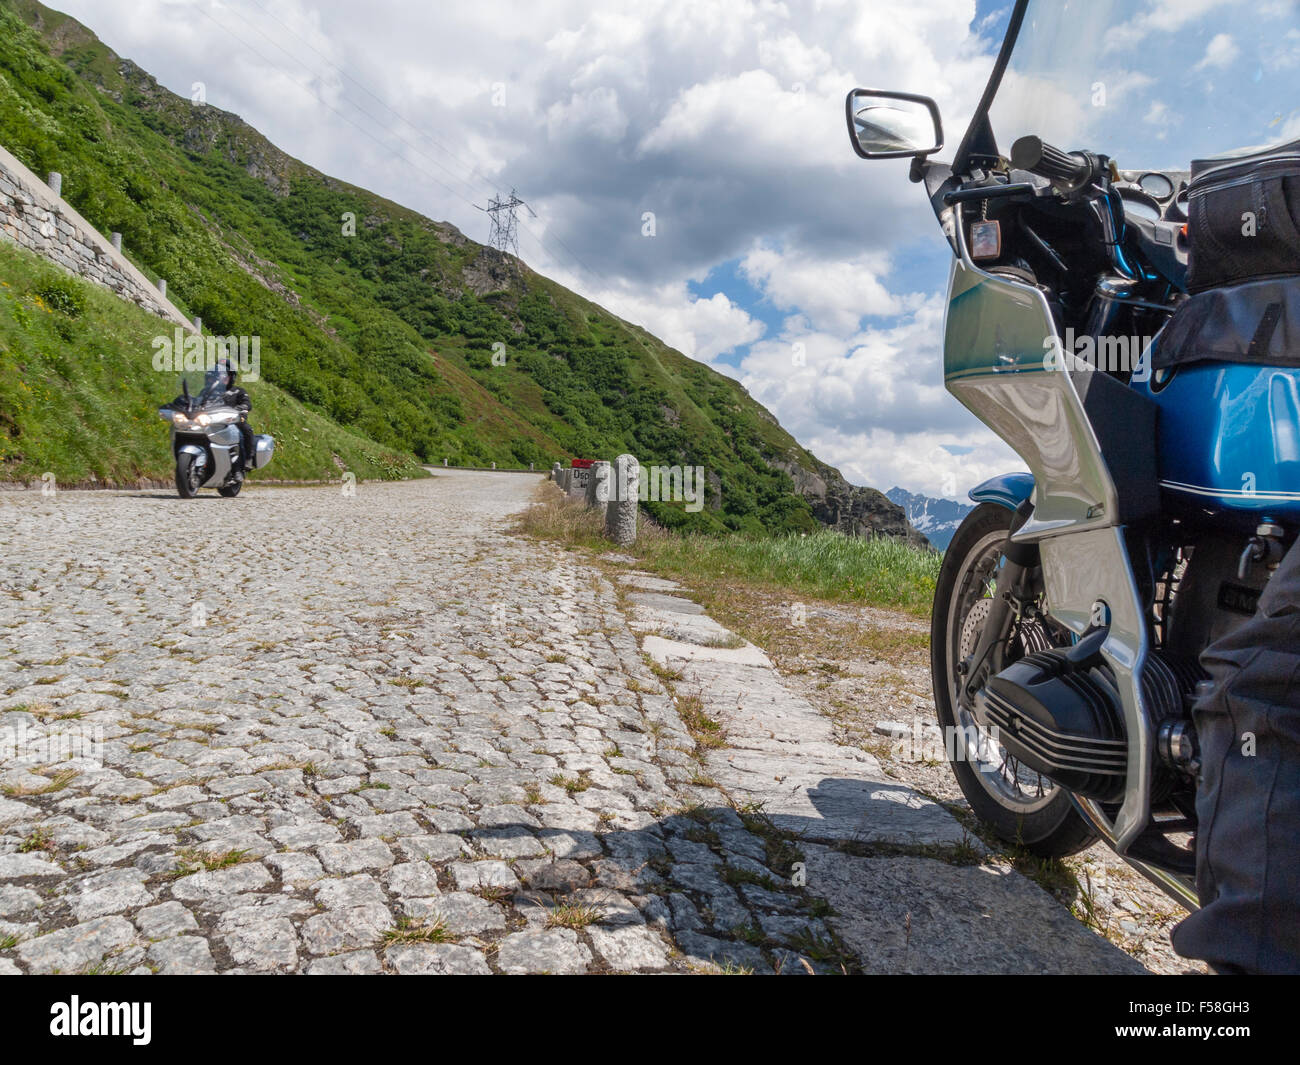 Motorbikes on the historic cobble stone paved Gotthard pass road (Tremola) that connects the Swiss cantons of Uri and Ticino. Stock Photo